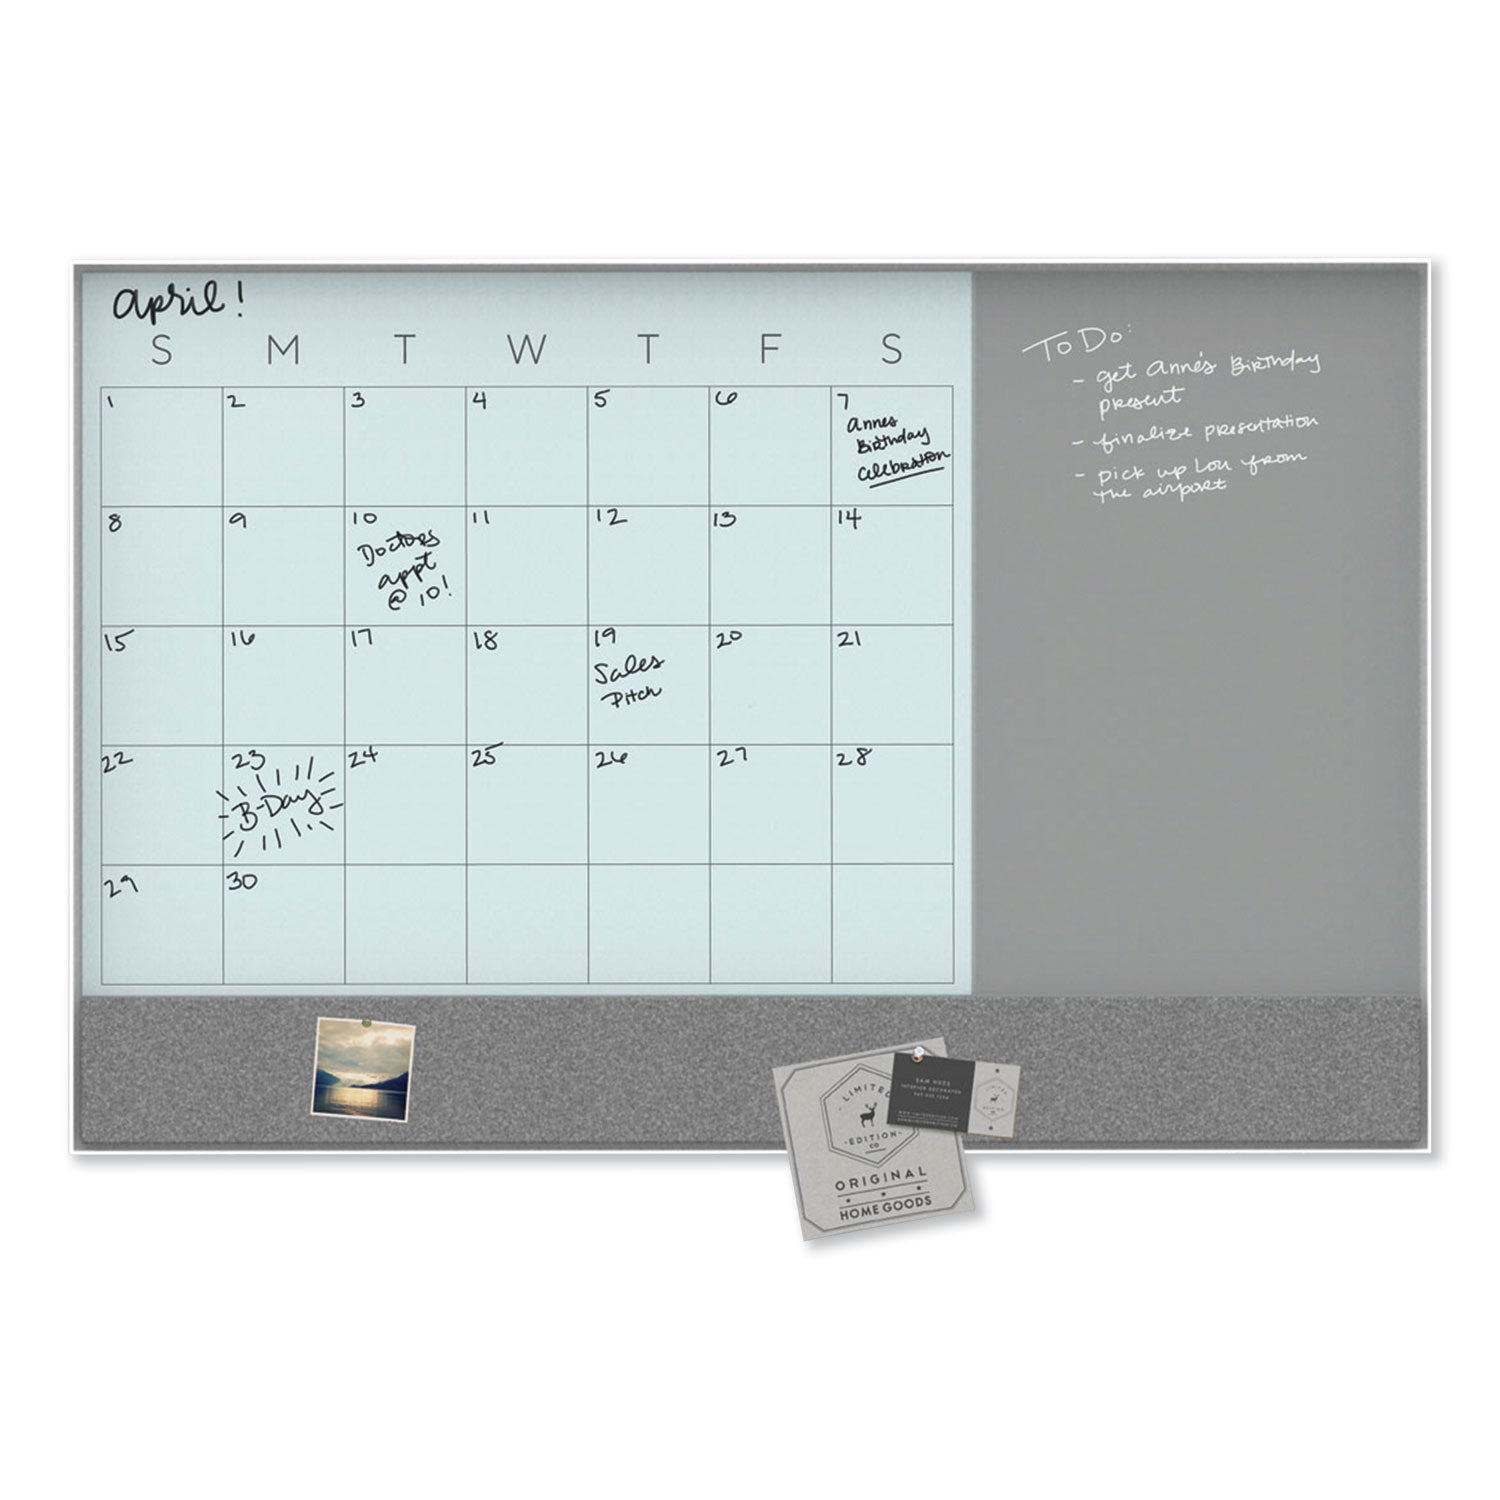 3n1-magnetic-glass-dry-erase-combo-board-35-x-23-month-view-gray-white-surface-white-aluminum-frame_ubr3197u0001 - 3